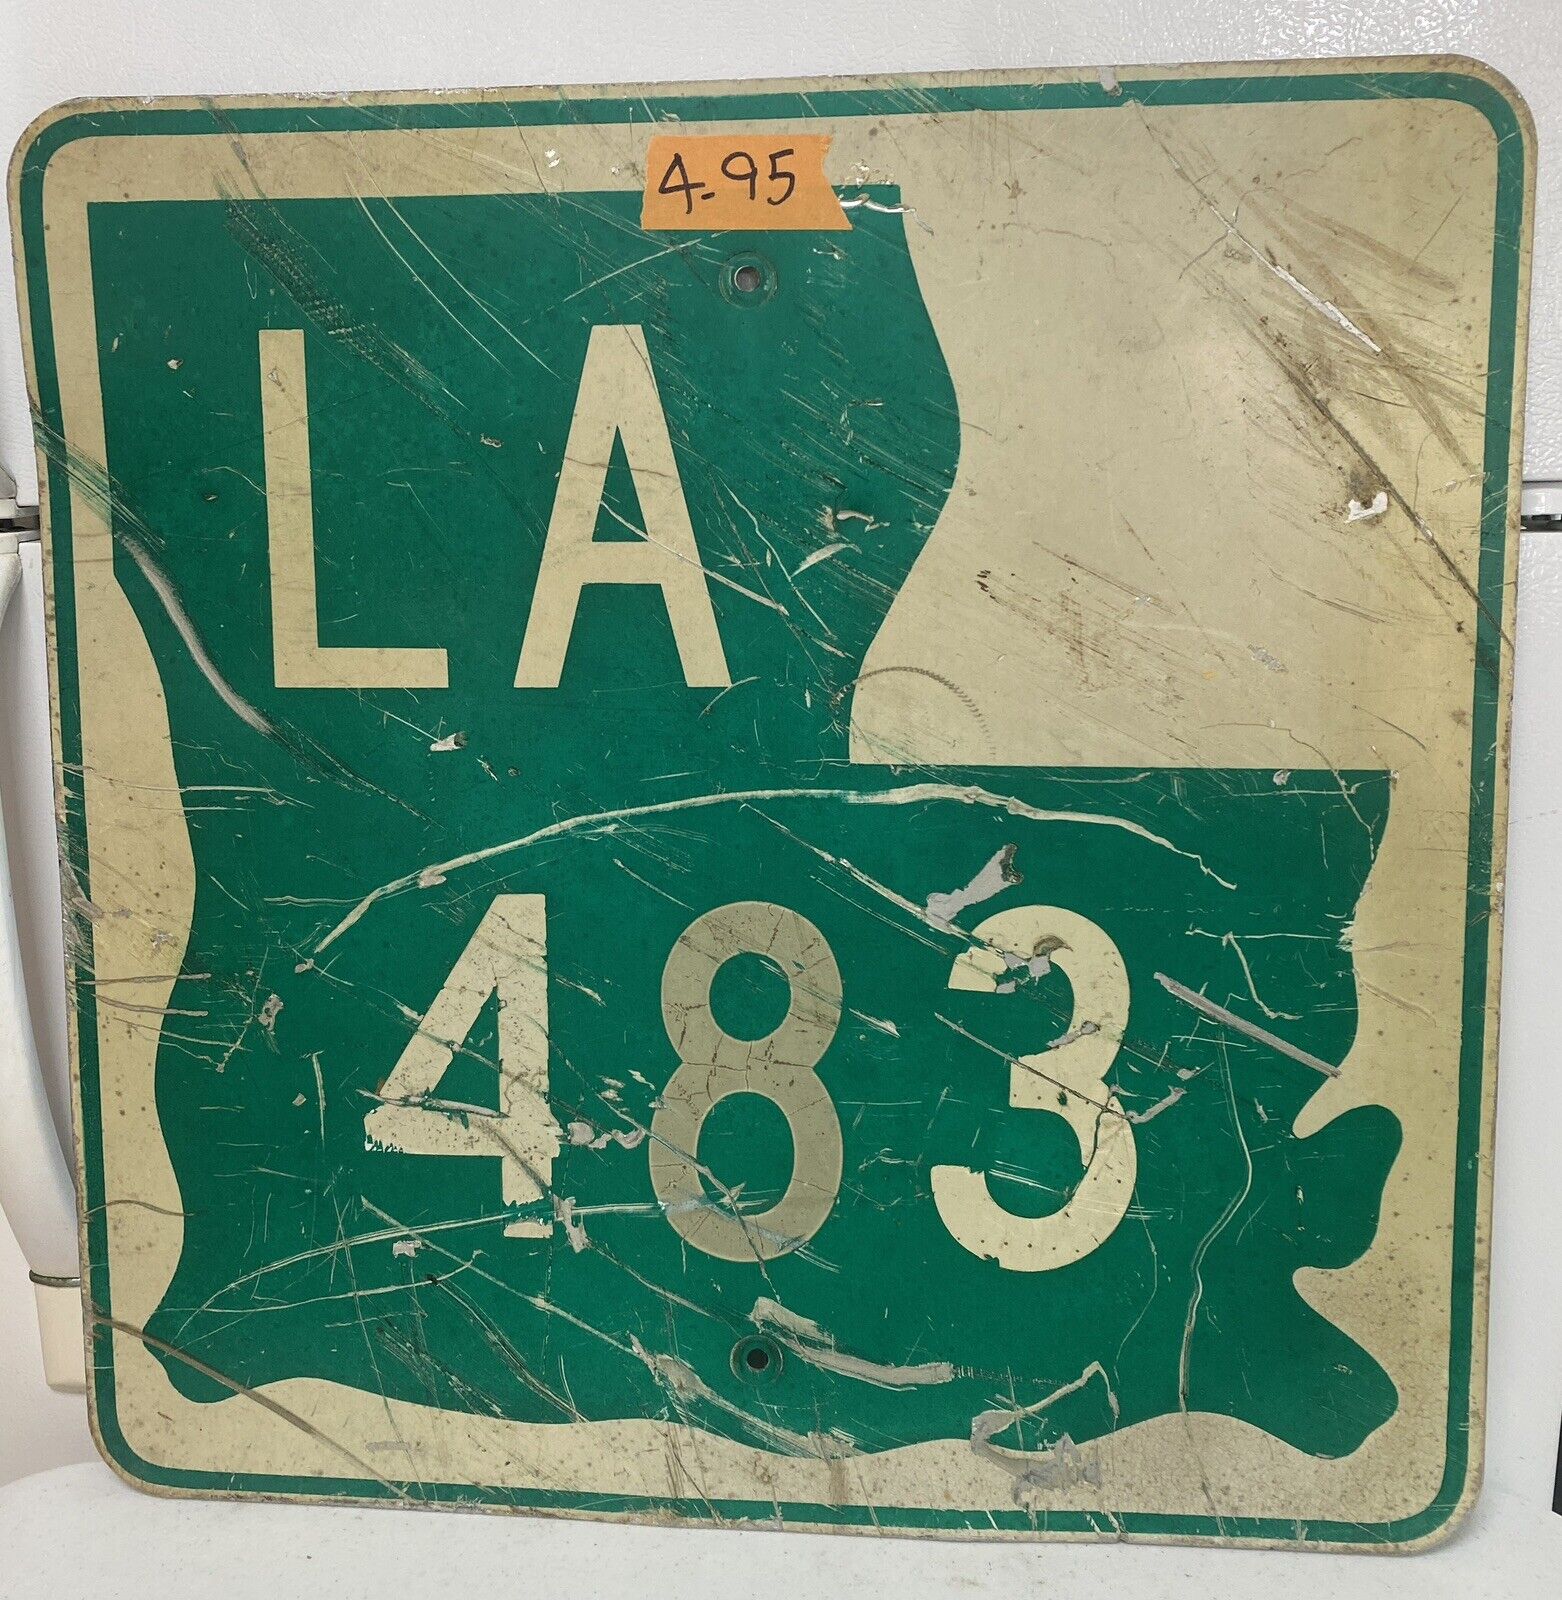 Authentic Retired Road Sign  Louisiana Route 483  Lower 48 Lot 4-95